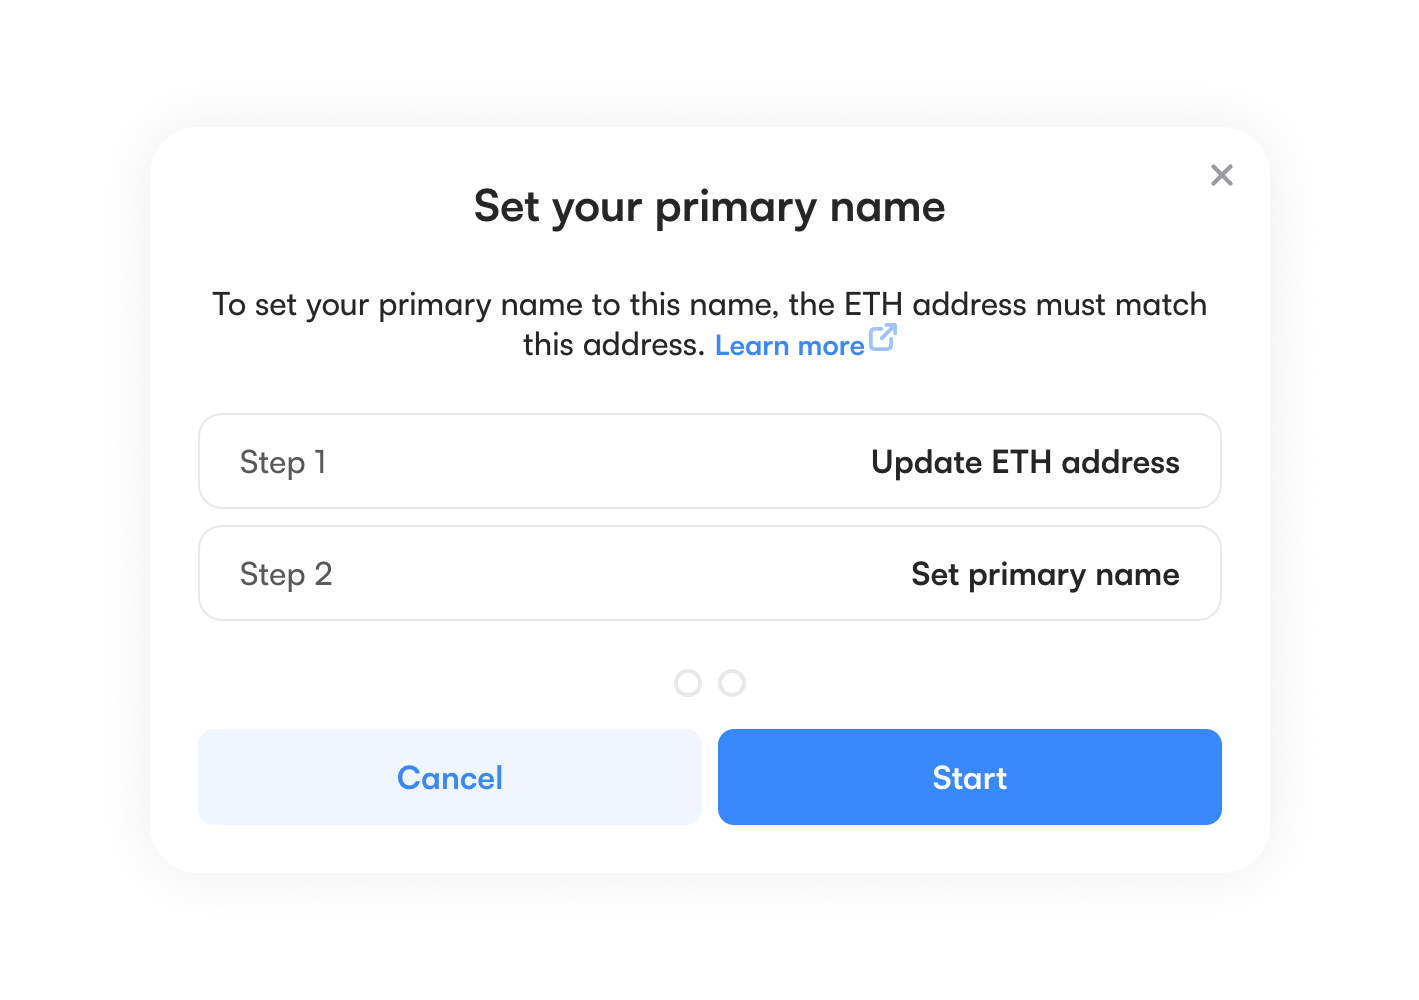 The guided transaction flow for setting a primary name